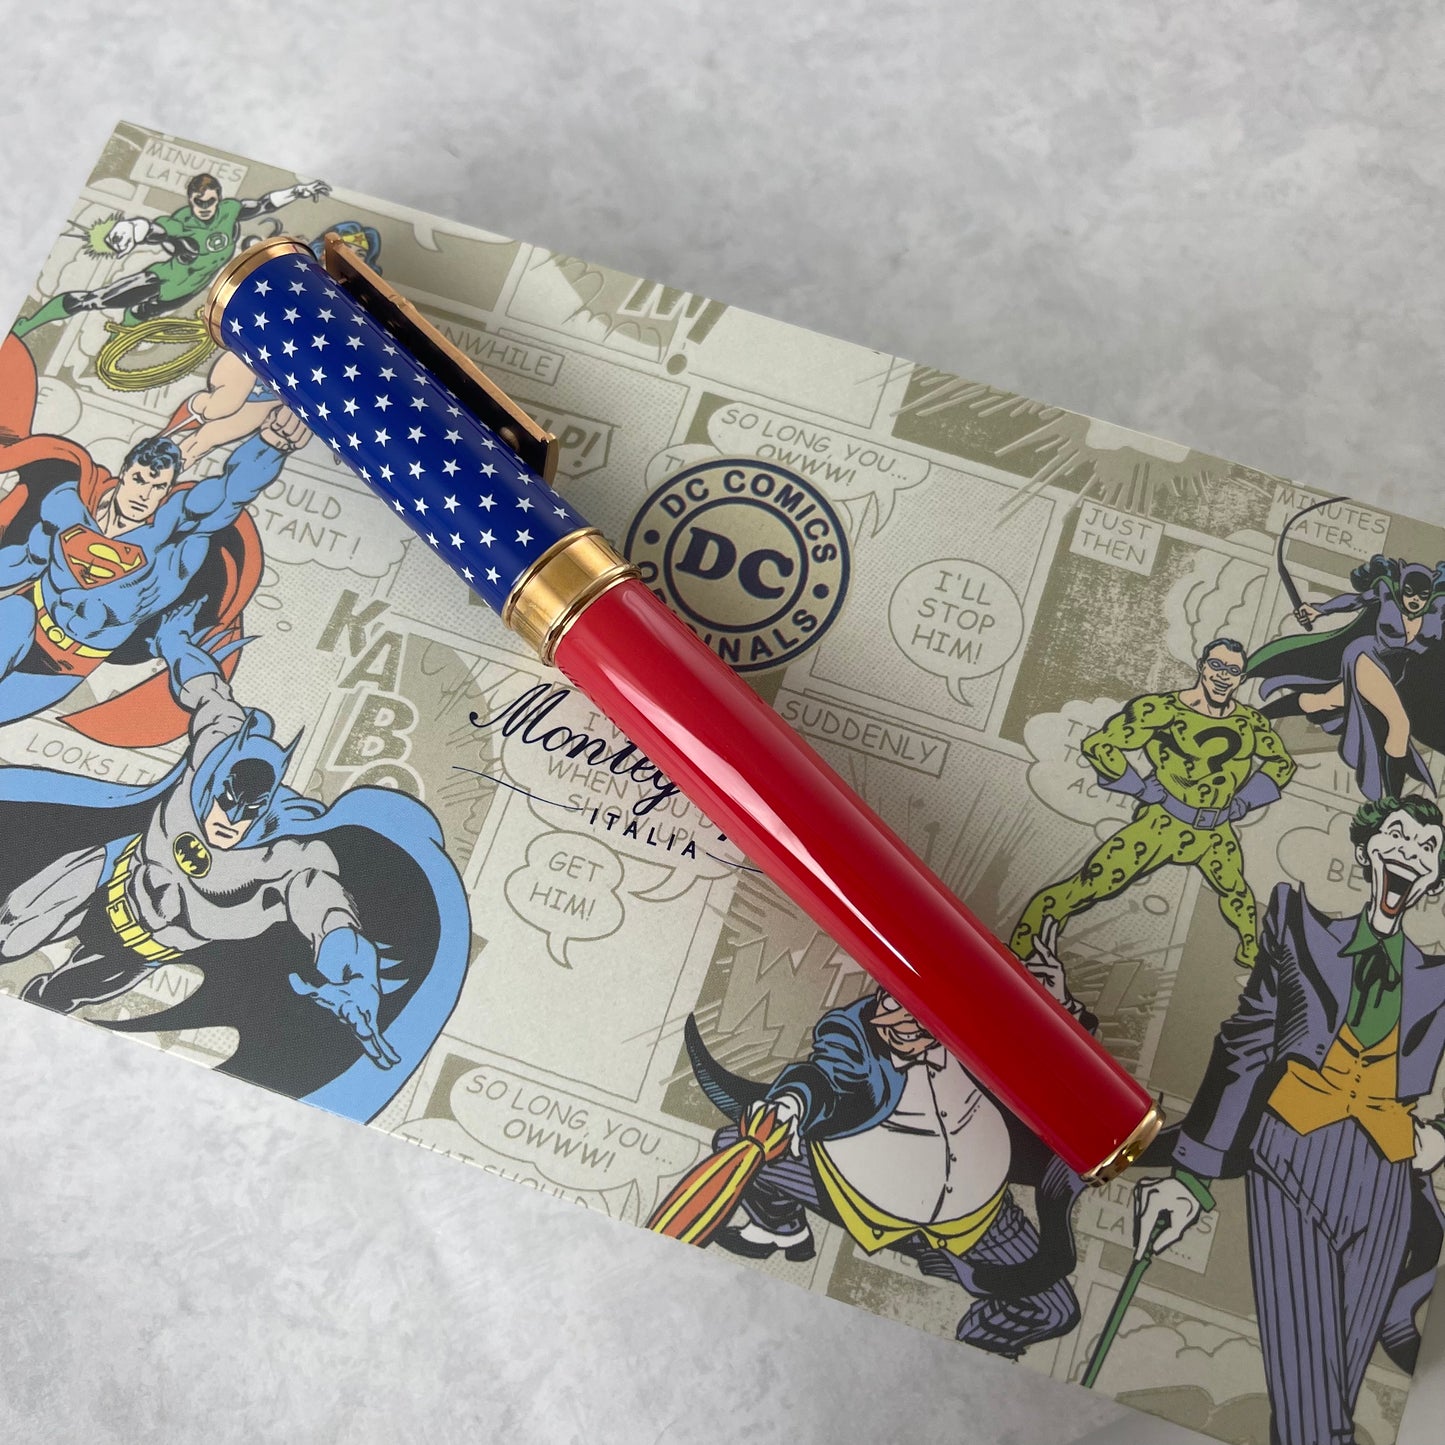 Pre-Owned Montegrappa Wonder Woman Rollerball